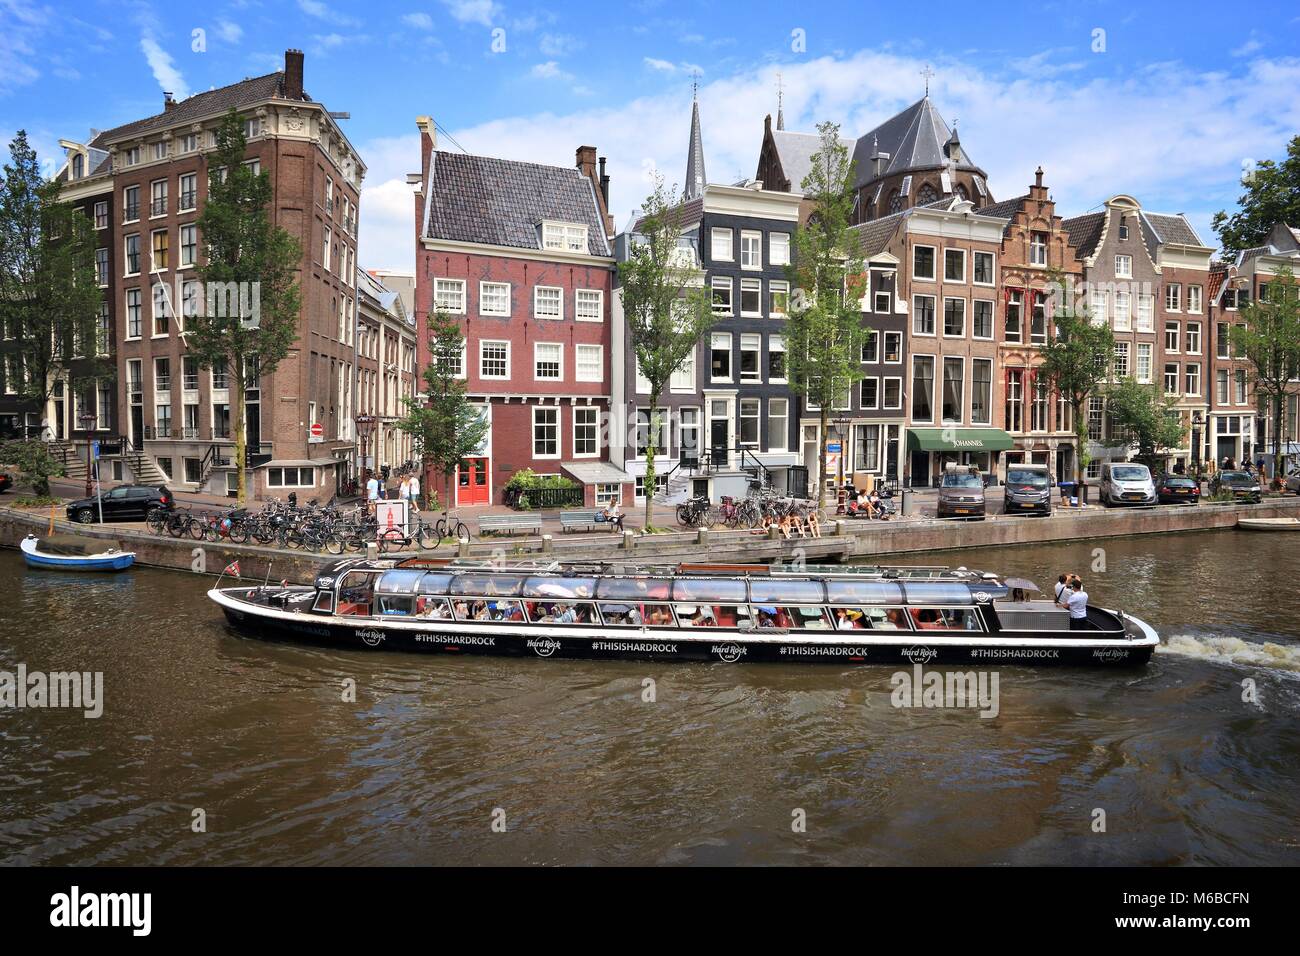 AMSTERDAM, NETHERLANDS - JULY 10, 2017: People visit Herengracht canal in Amsterdam, Netherlands. Amsterdam is the capital city of The Netherlands. Stock Photo